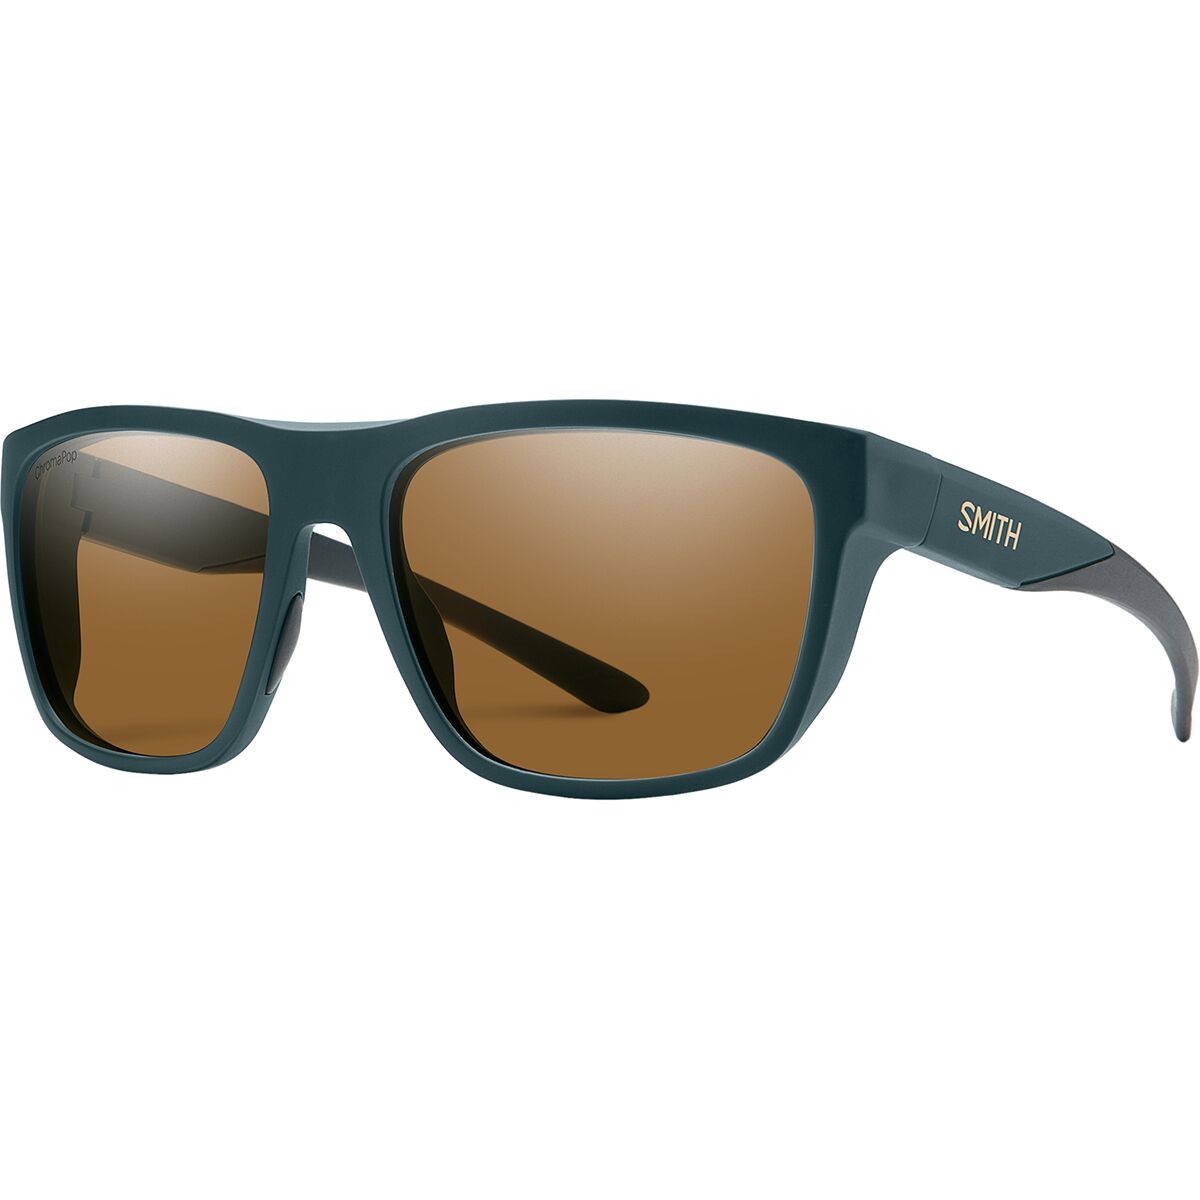 Ted Smith Sunglasses : Buy TED SMITH UV Protection Rectangular Sunglasses  For Men Women - Clasique-C6 Online | Nykaa Fashion